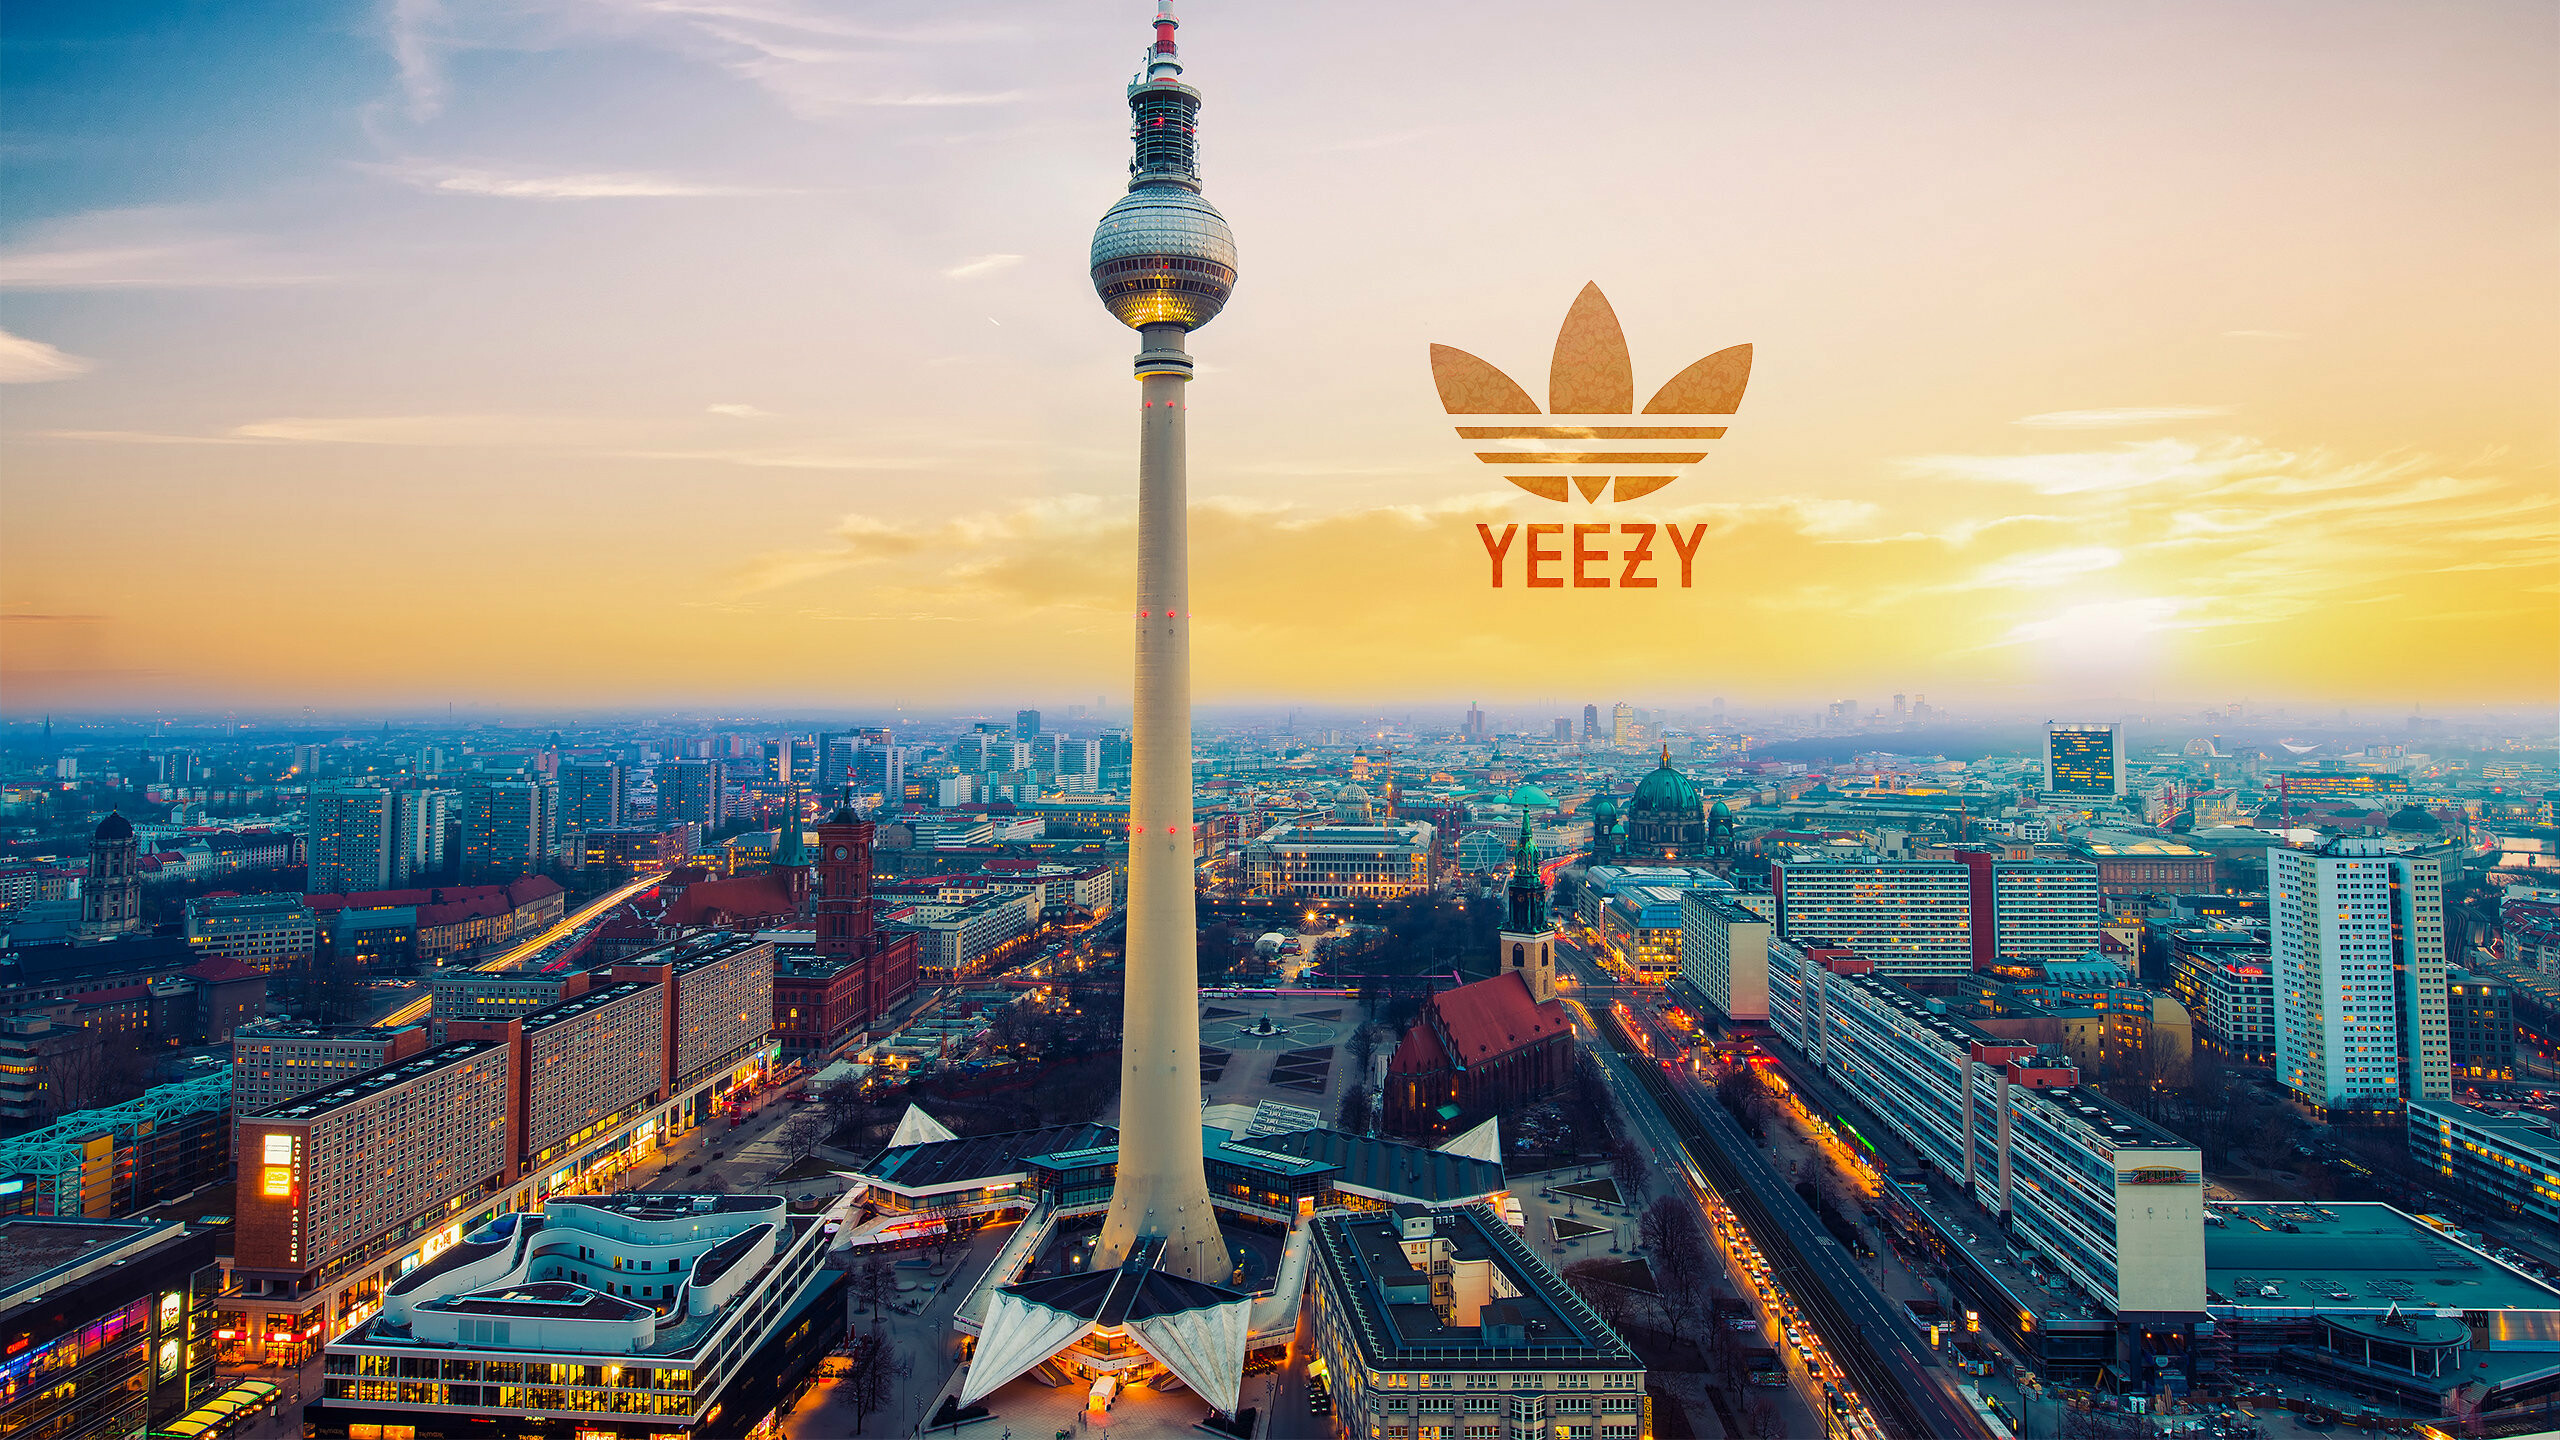 Yeezy: The Adidas and Kanye West collaboration officially debuted in February 2015. 2560x1440 HD Wallpaper.